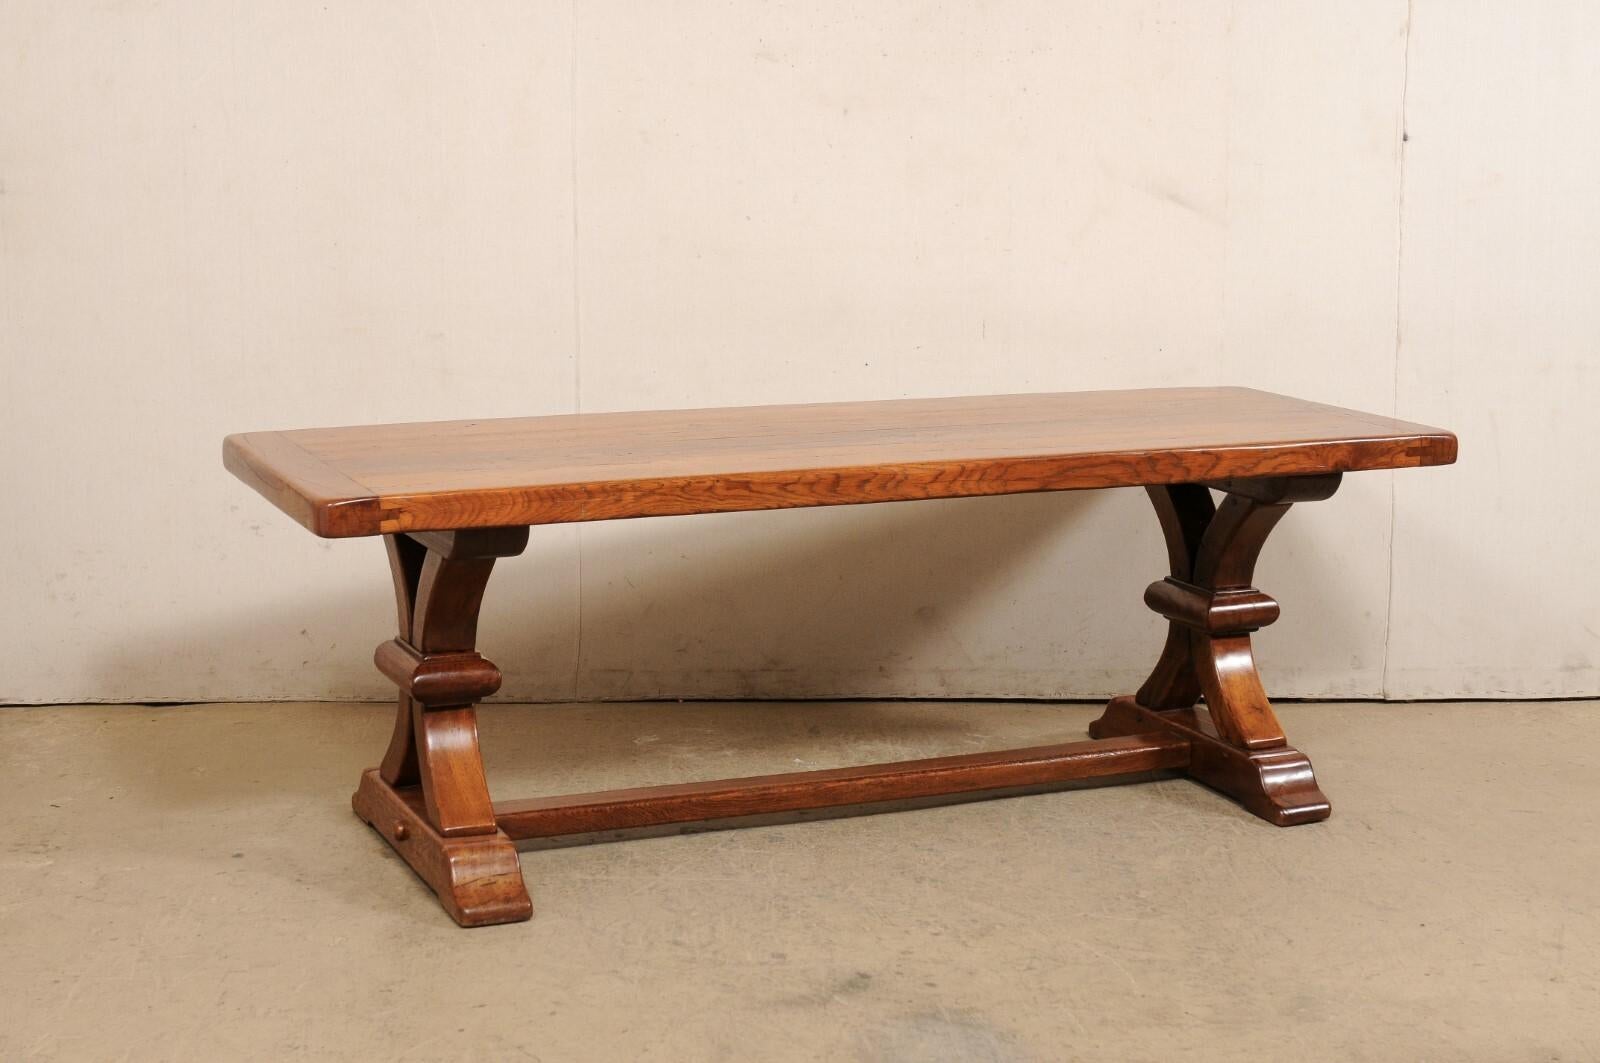 A French trestle leg dining table from the 1920s-1940. This elegant antique table from France has a rectangular-shaped top, just over 7 feet in length, which is presented upon a pair of beautifully-carved trestle style legs that are raised upon rail